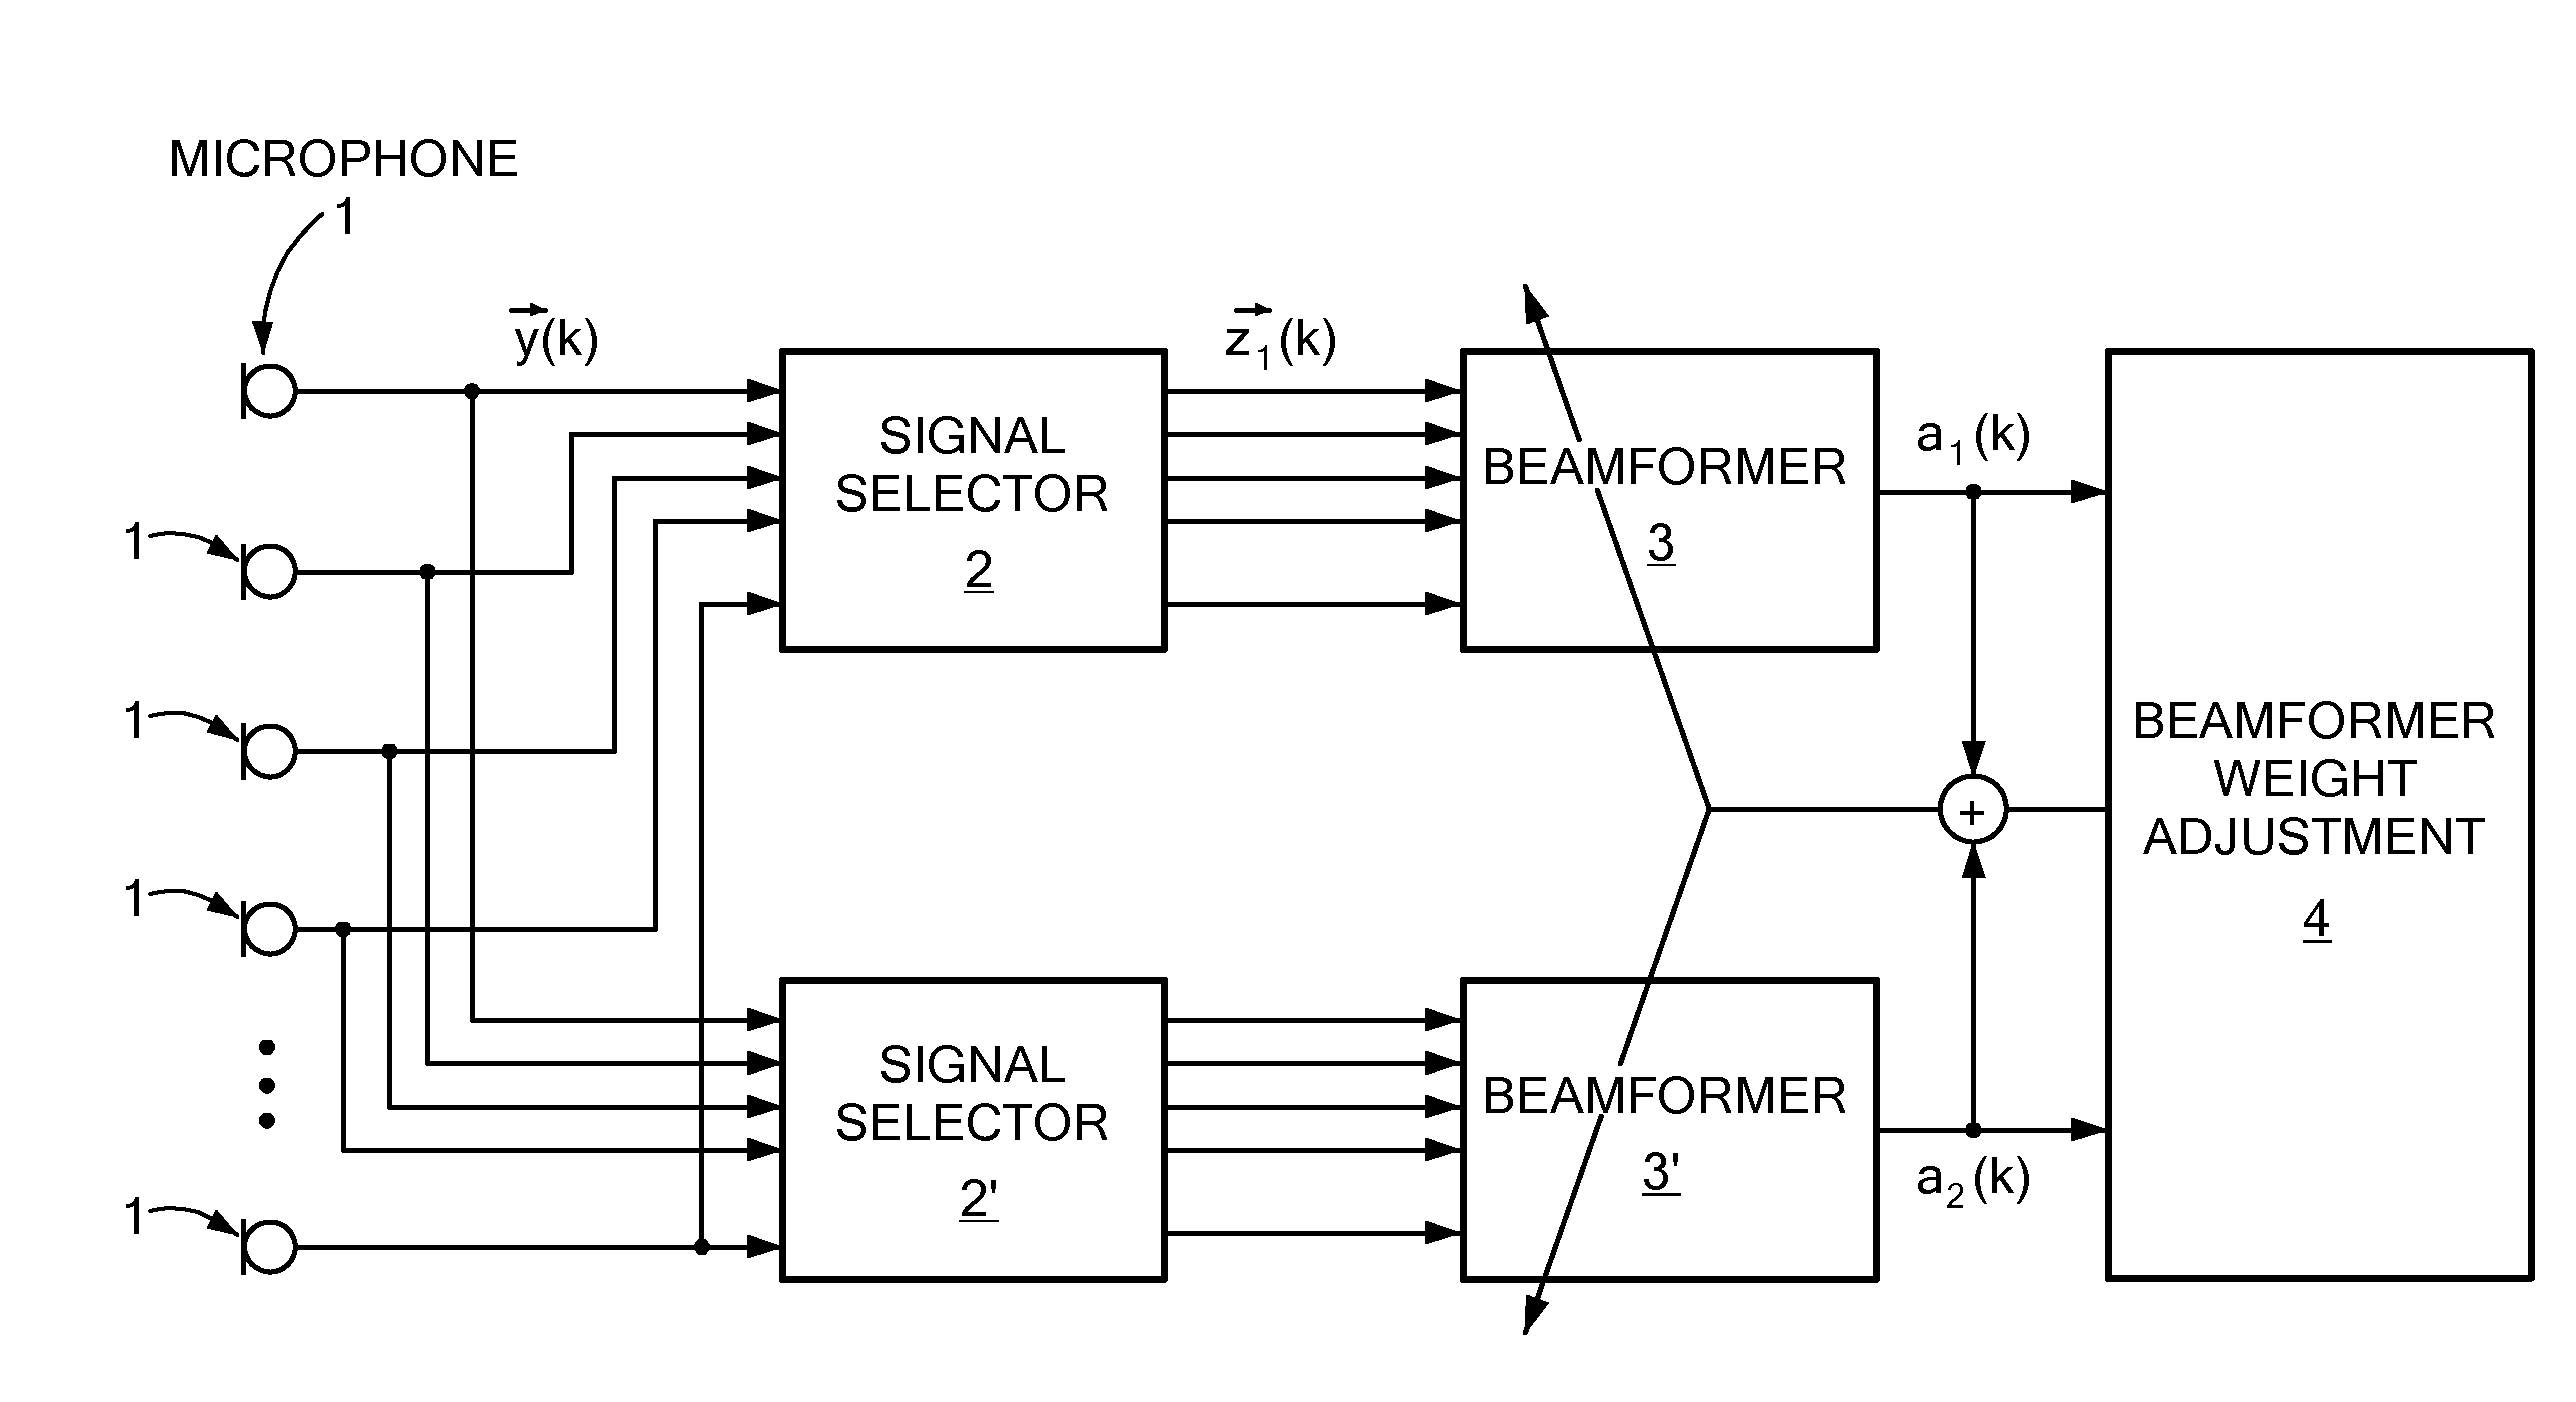 Beamforming Pre-Processing for Speaker Localization